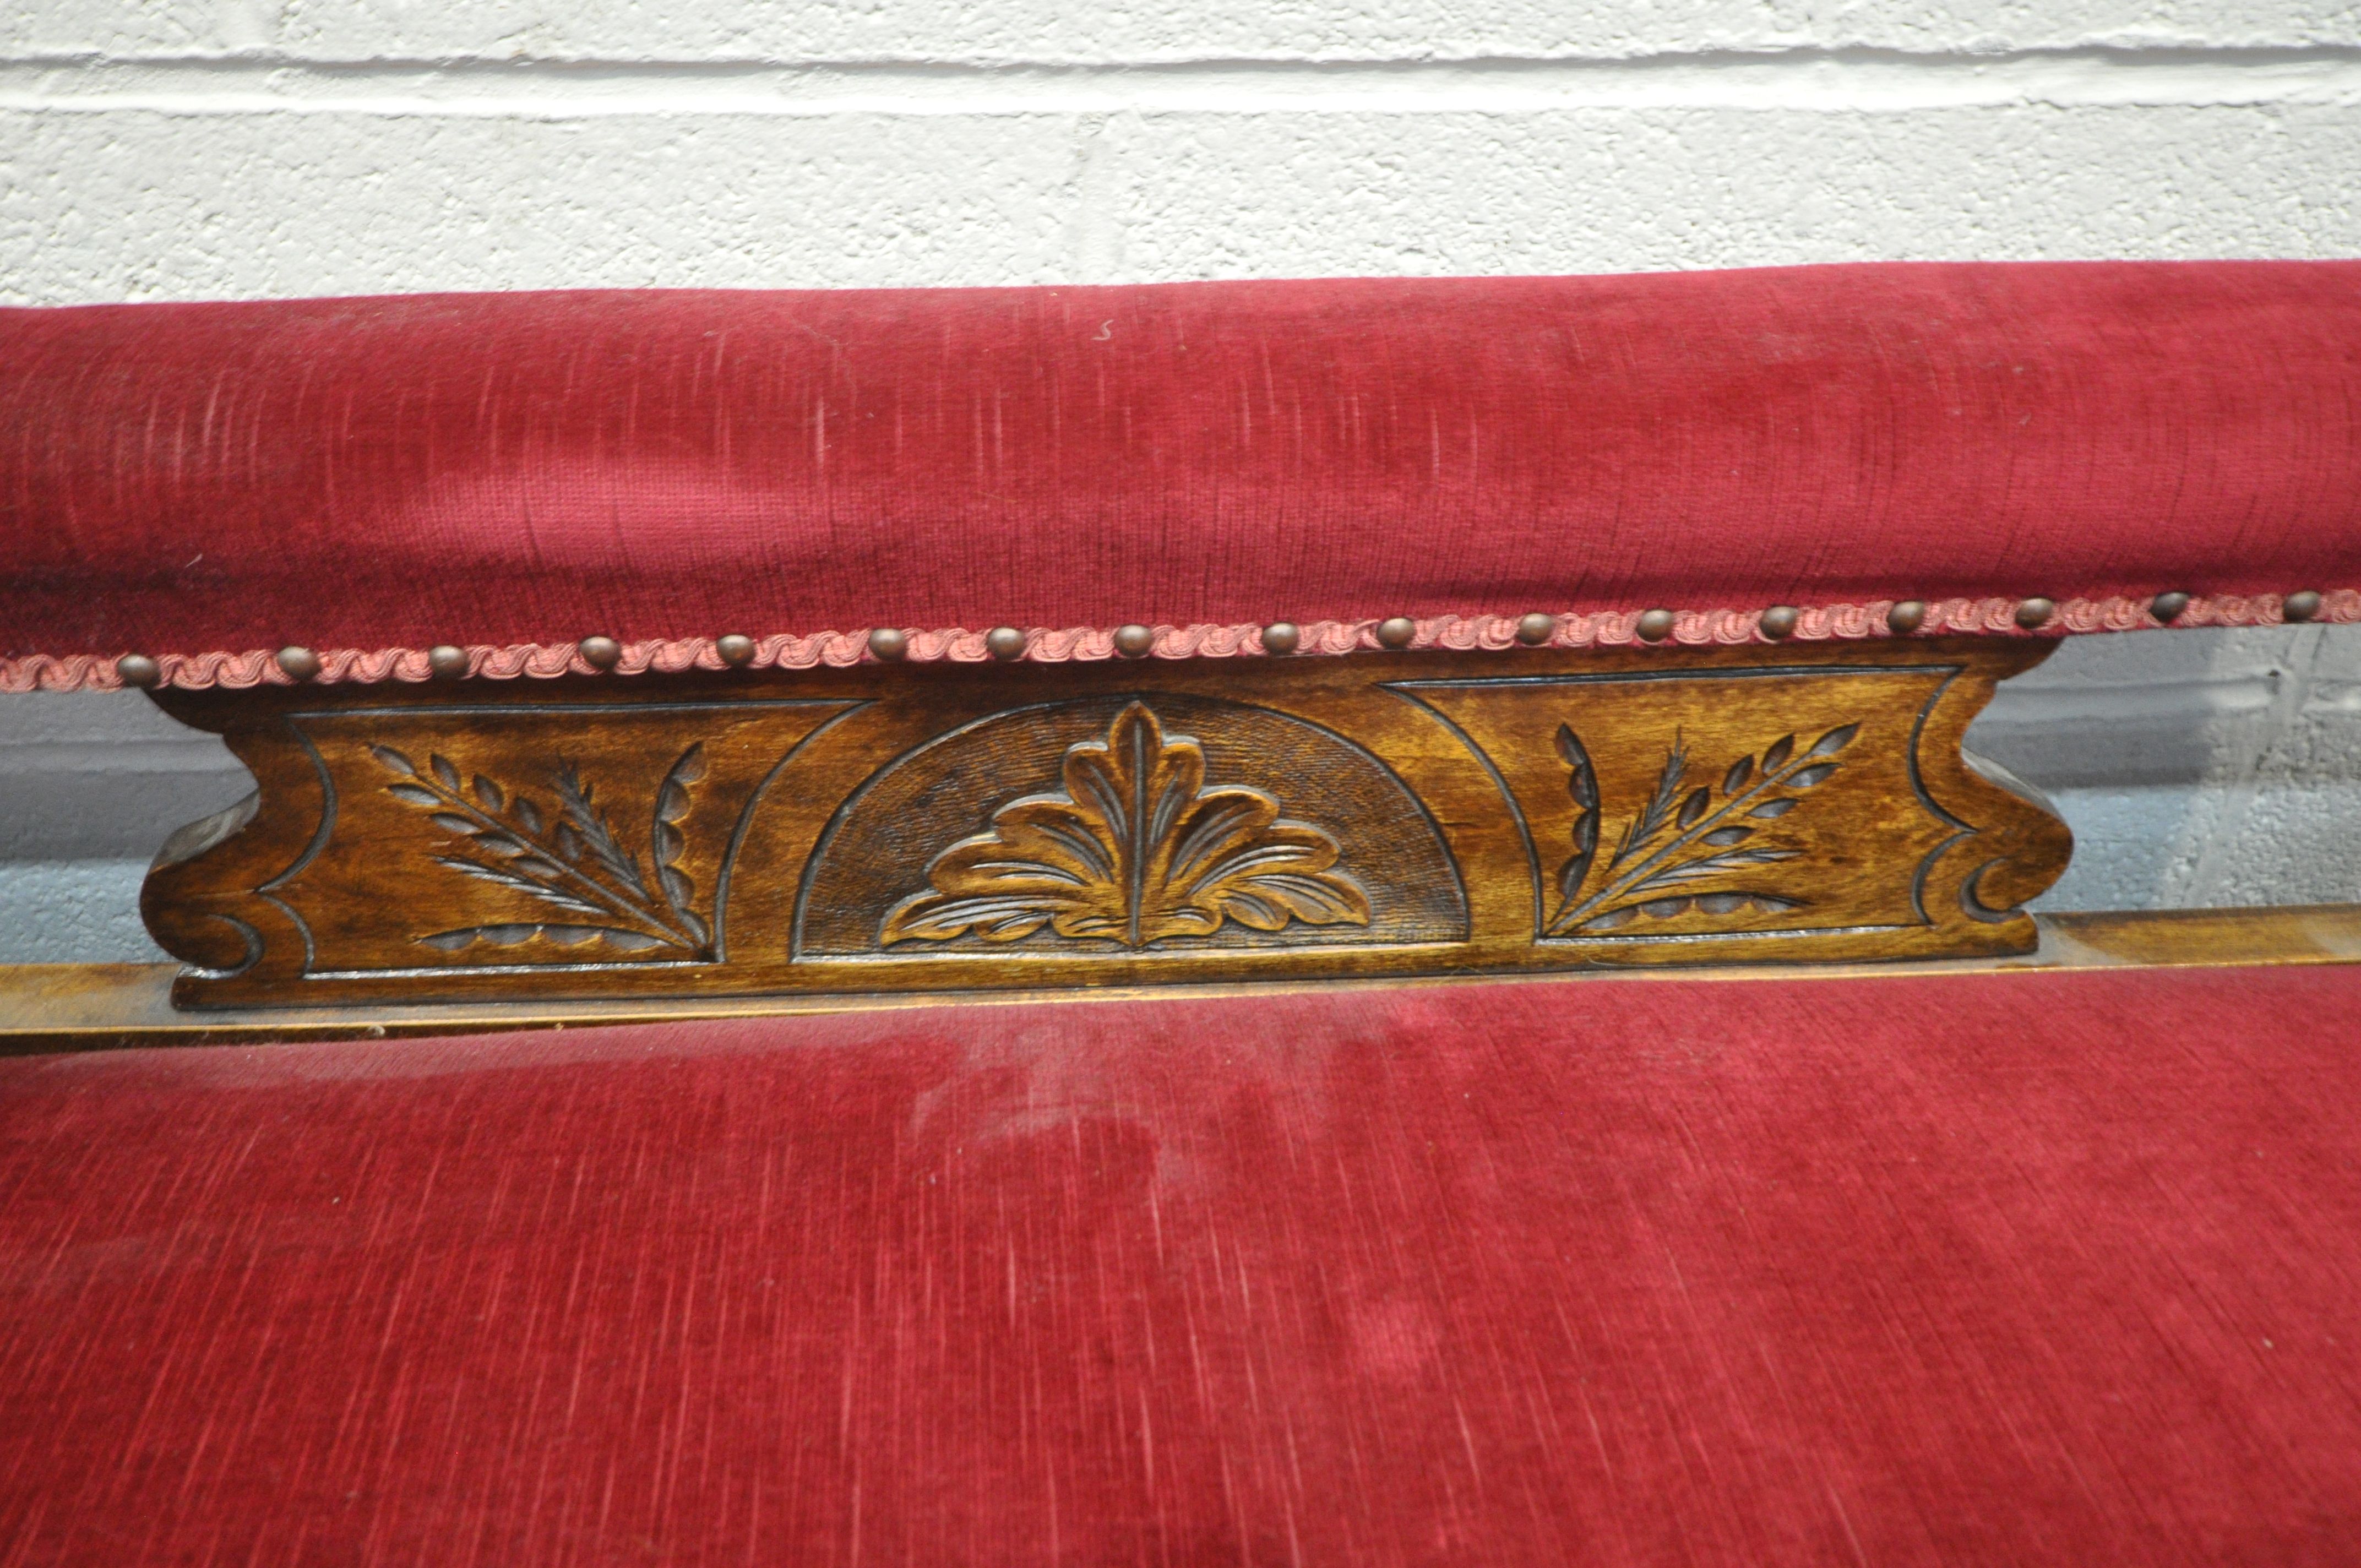 AN EDWARDIAN MAHOGANY CHAISE LONGUE, with buttoned fabric, length 172cm x depth 60cm x height - Image 3 of 4